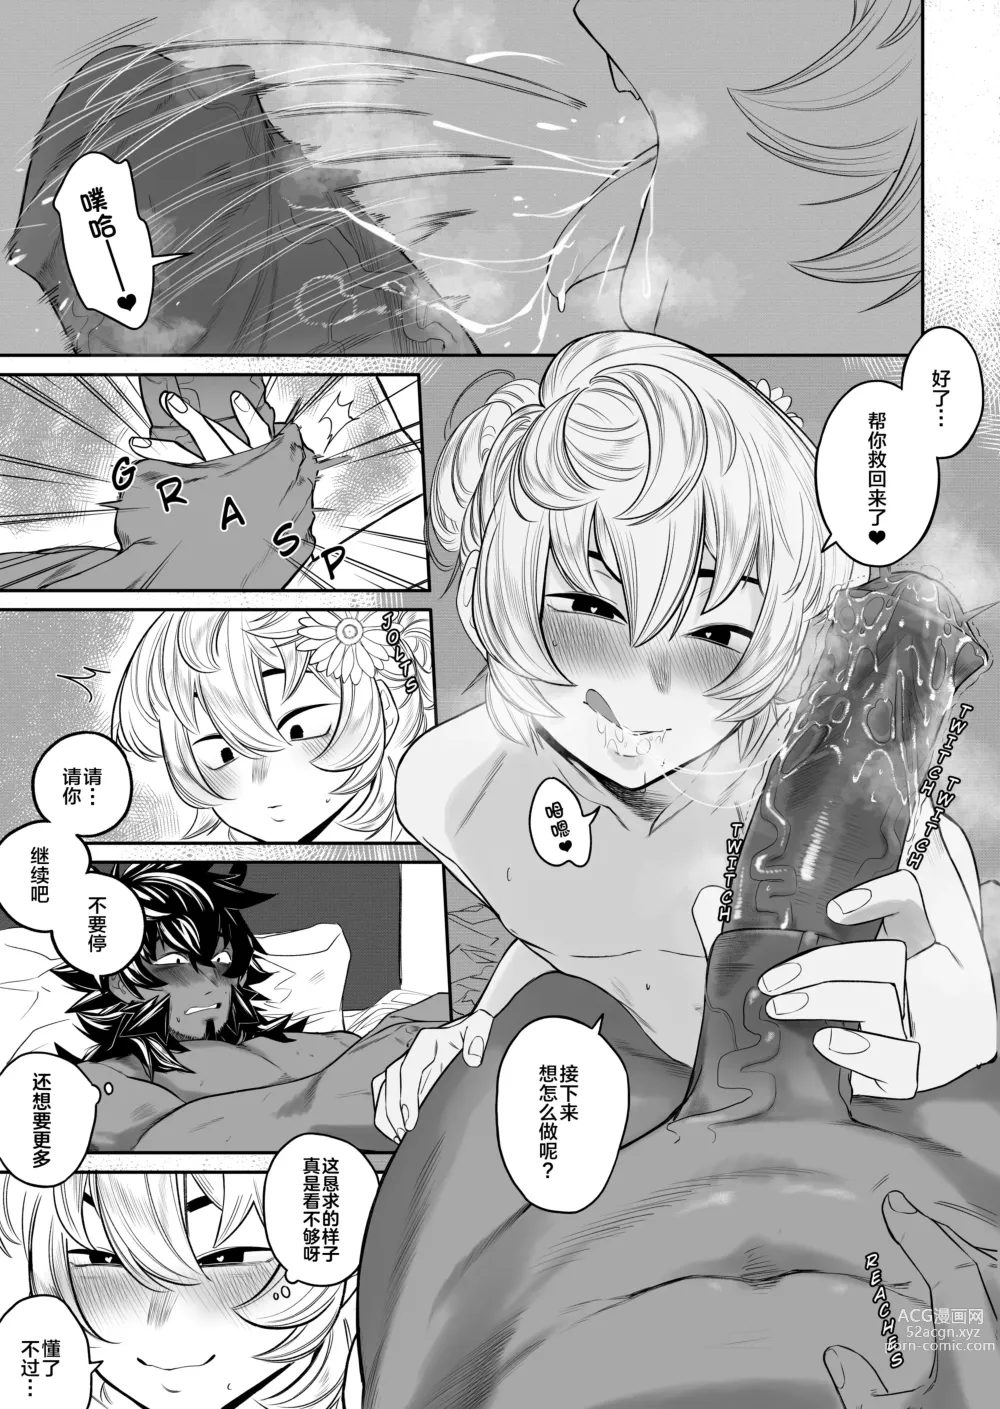 Page 7 of doujinshi 狡猾小恶魔